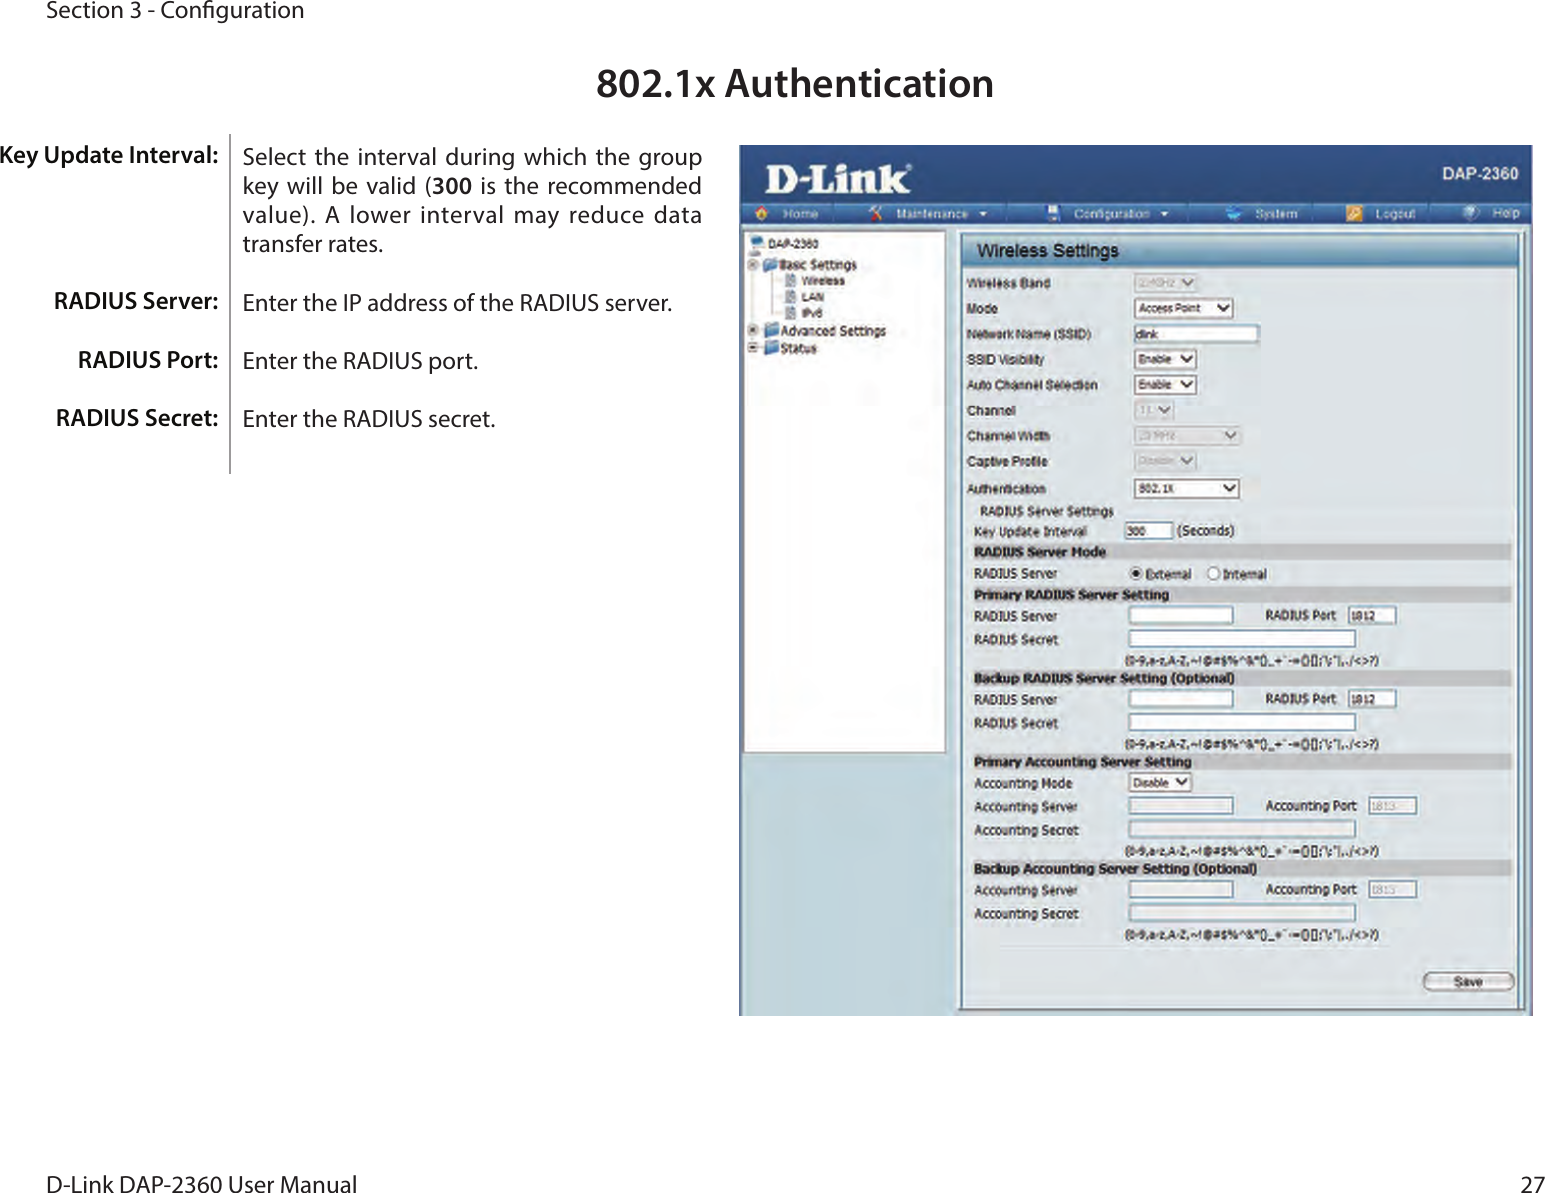 27D-Link DAP-2360 User ManualSection 3 - Conguration802.1x AuthenticationSelect  the interval during which  the group key  will  be  valid  (300  is  the  recommended value). A lower interval may reduce data transfer rates.Enter the IP address of the RADIUS server.Enter the RADIUS port.Enter the RADIUS secret.Key Update Interval: RADIUS Server:RADIUS Port:RADIUS Secret: